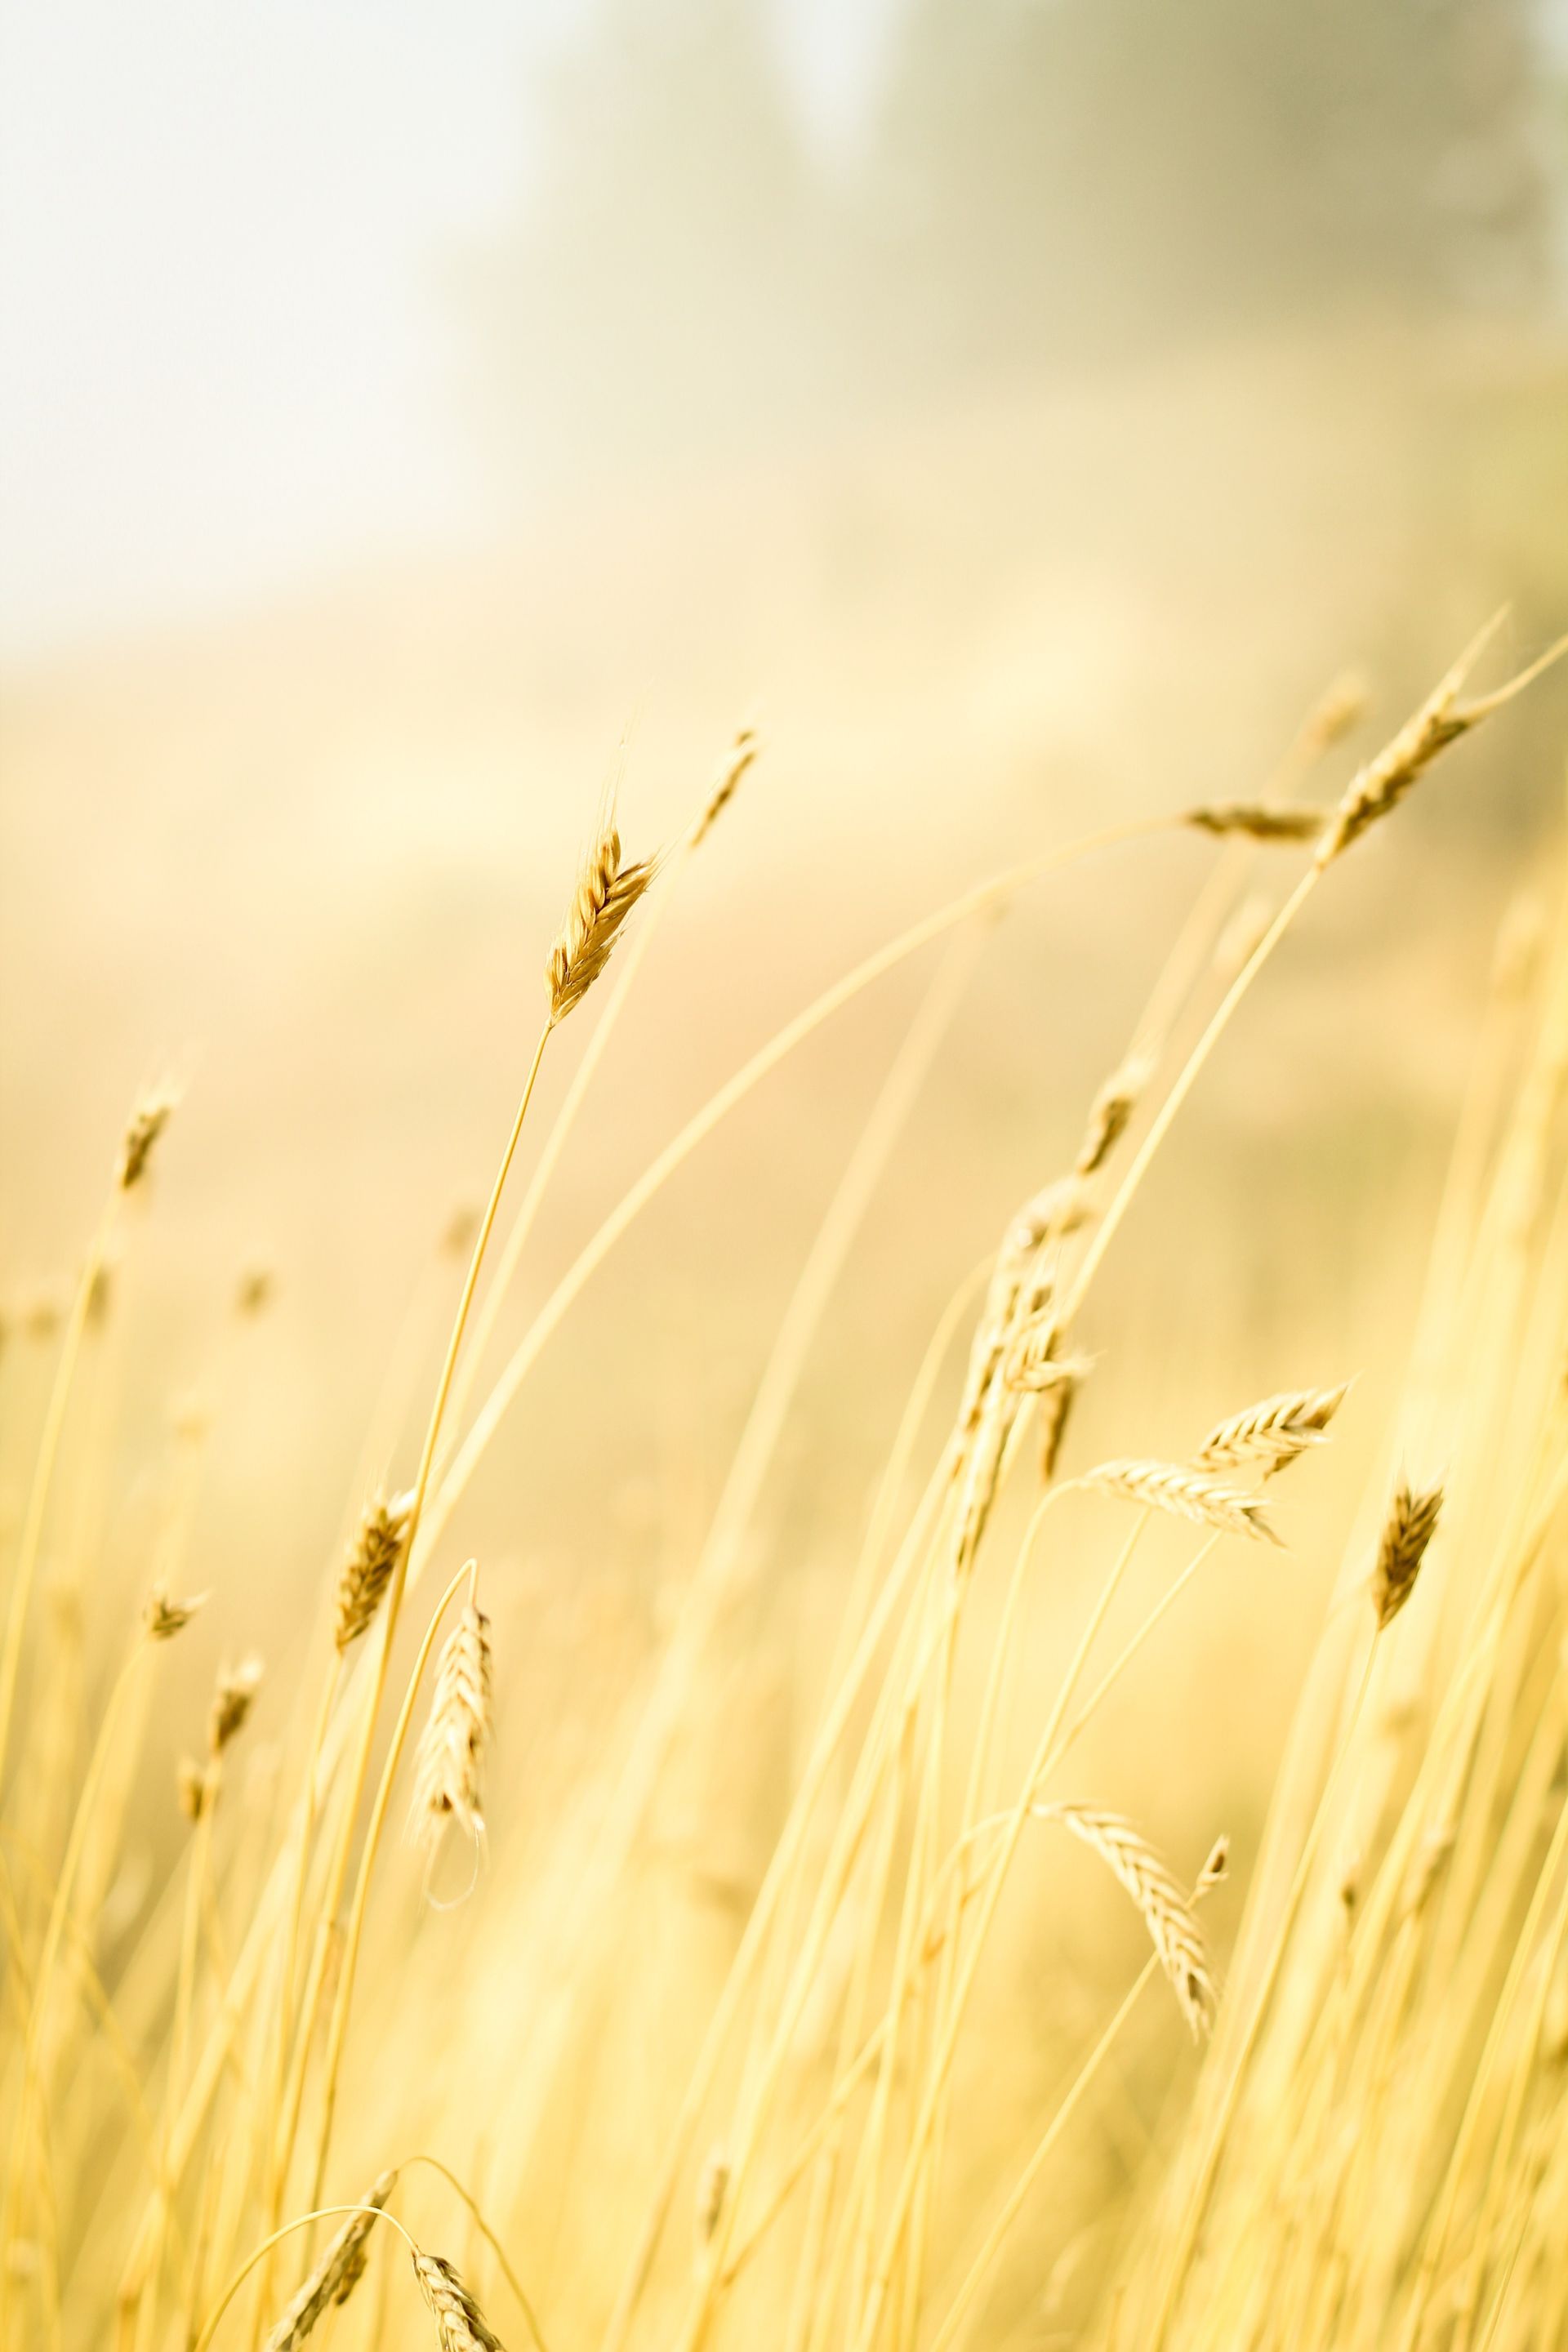 A close-up of wheat in the sunshine.